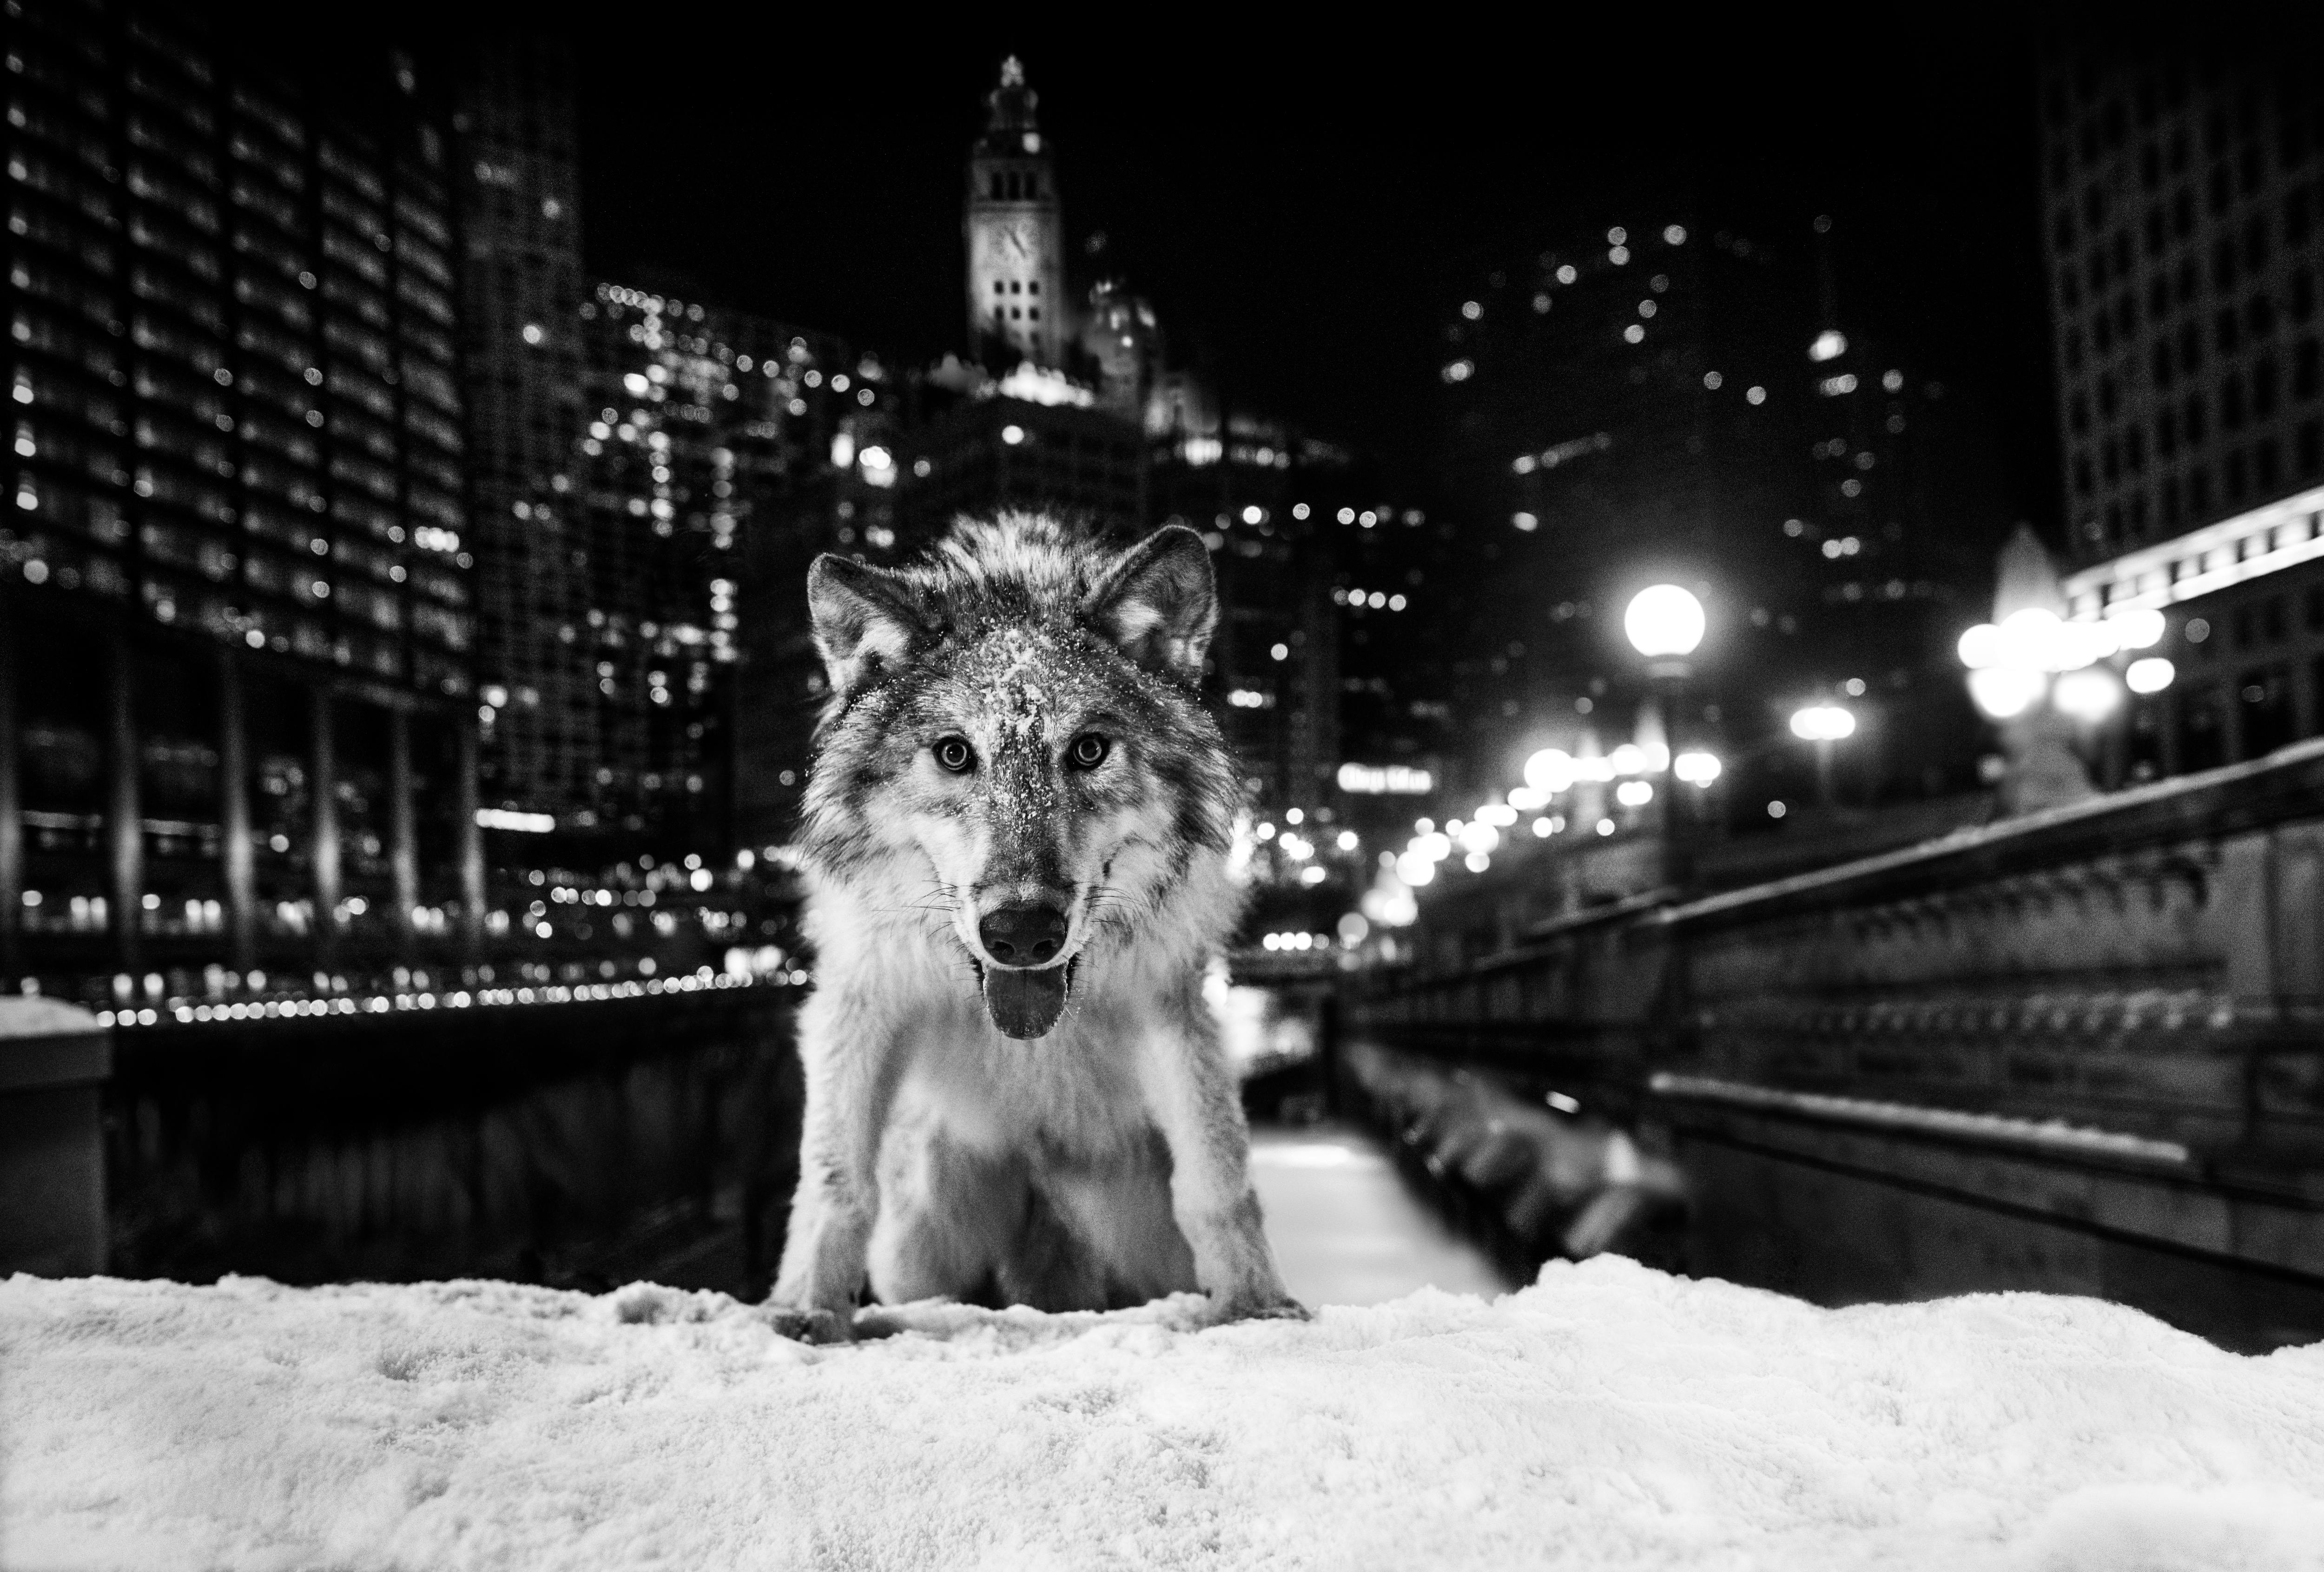 David Yarrow Black and White Photograph - Sweet Home Chicago: Homage to a Great City 